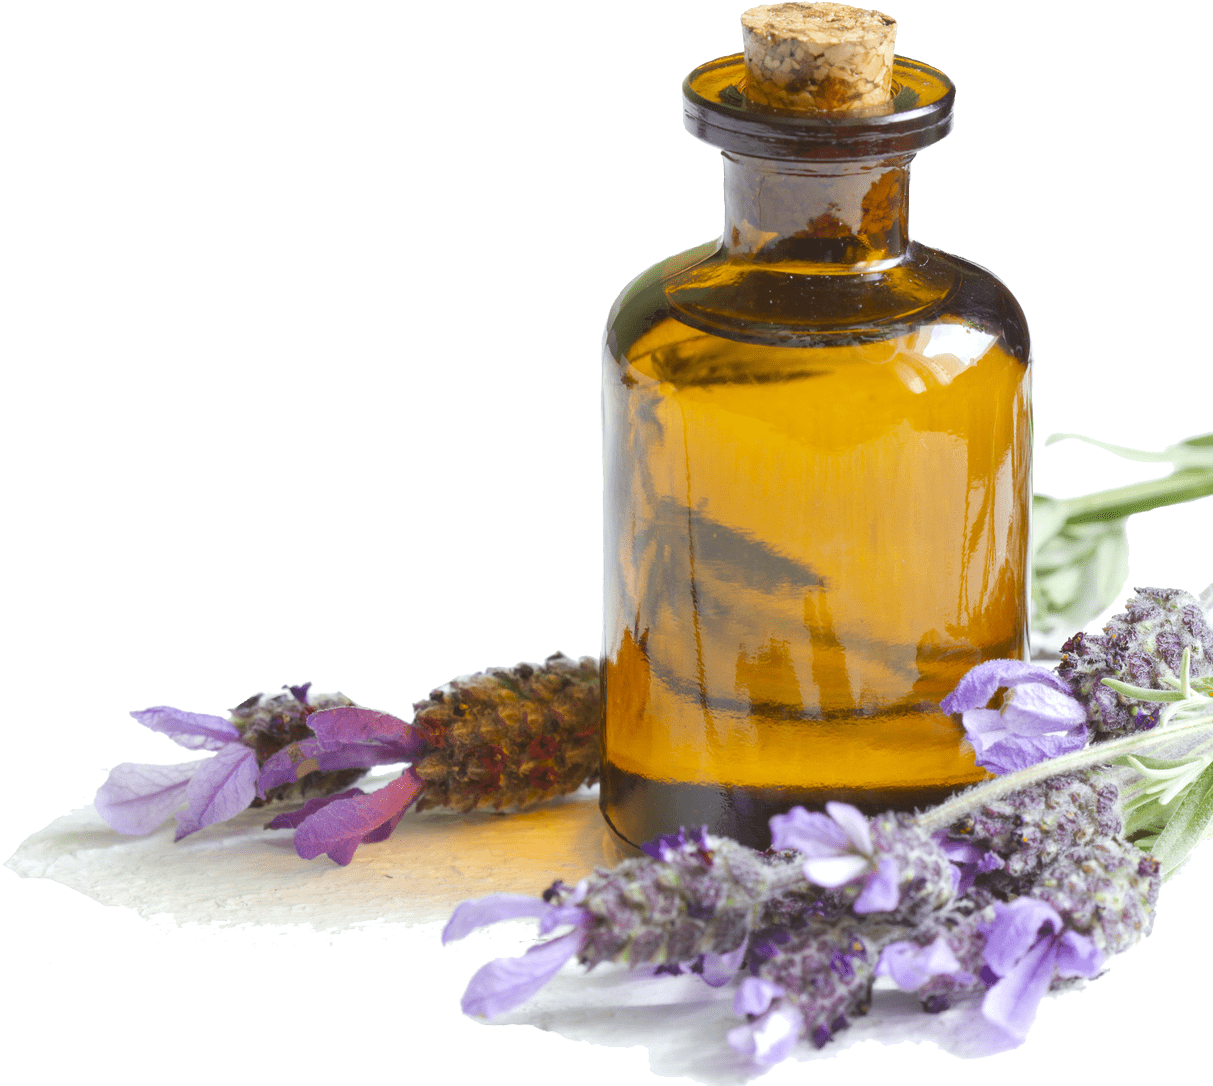 A Bottle Of Essential Oil Next To Purple Flowers